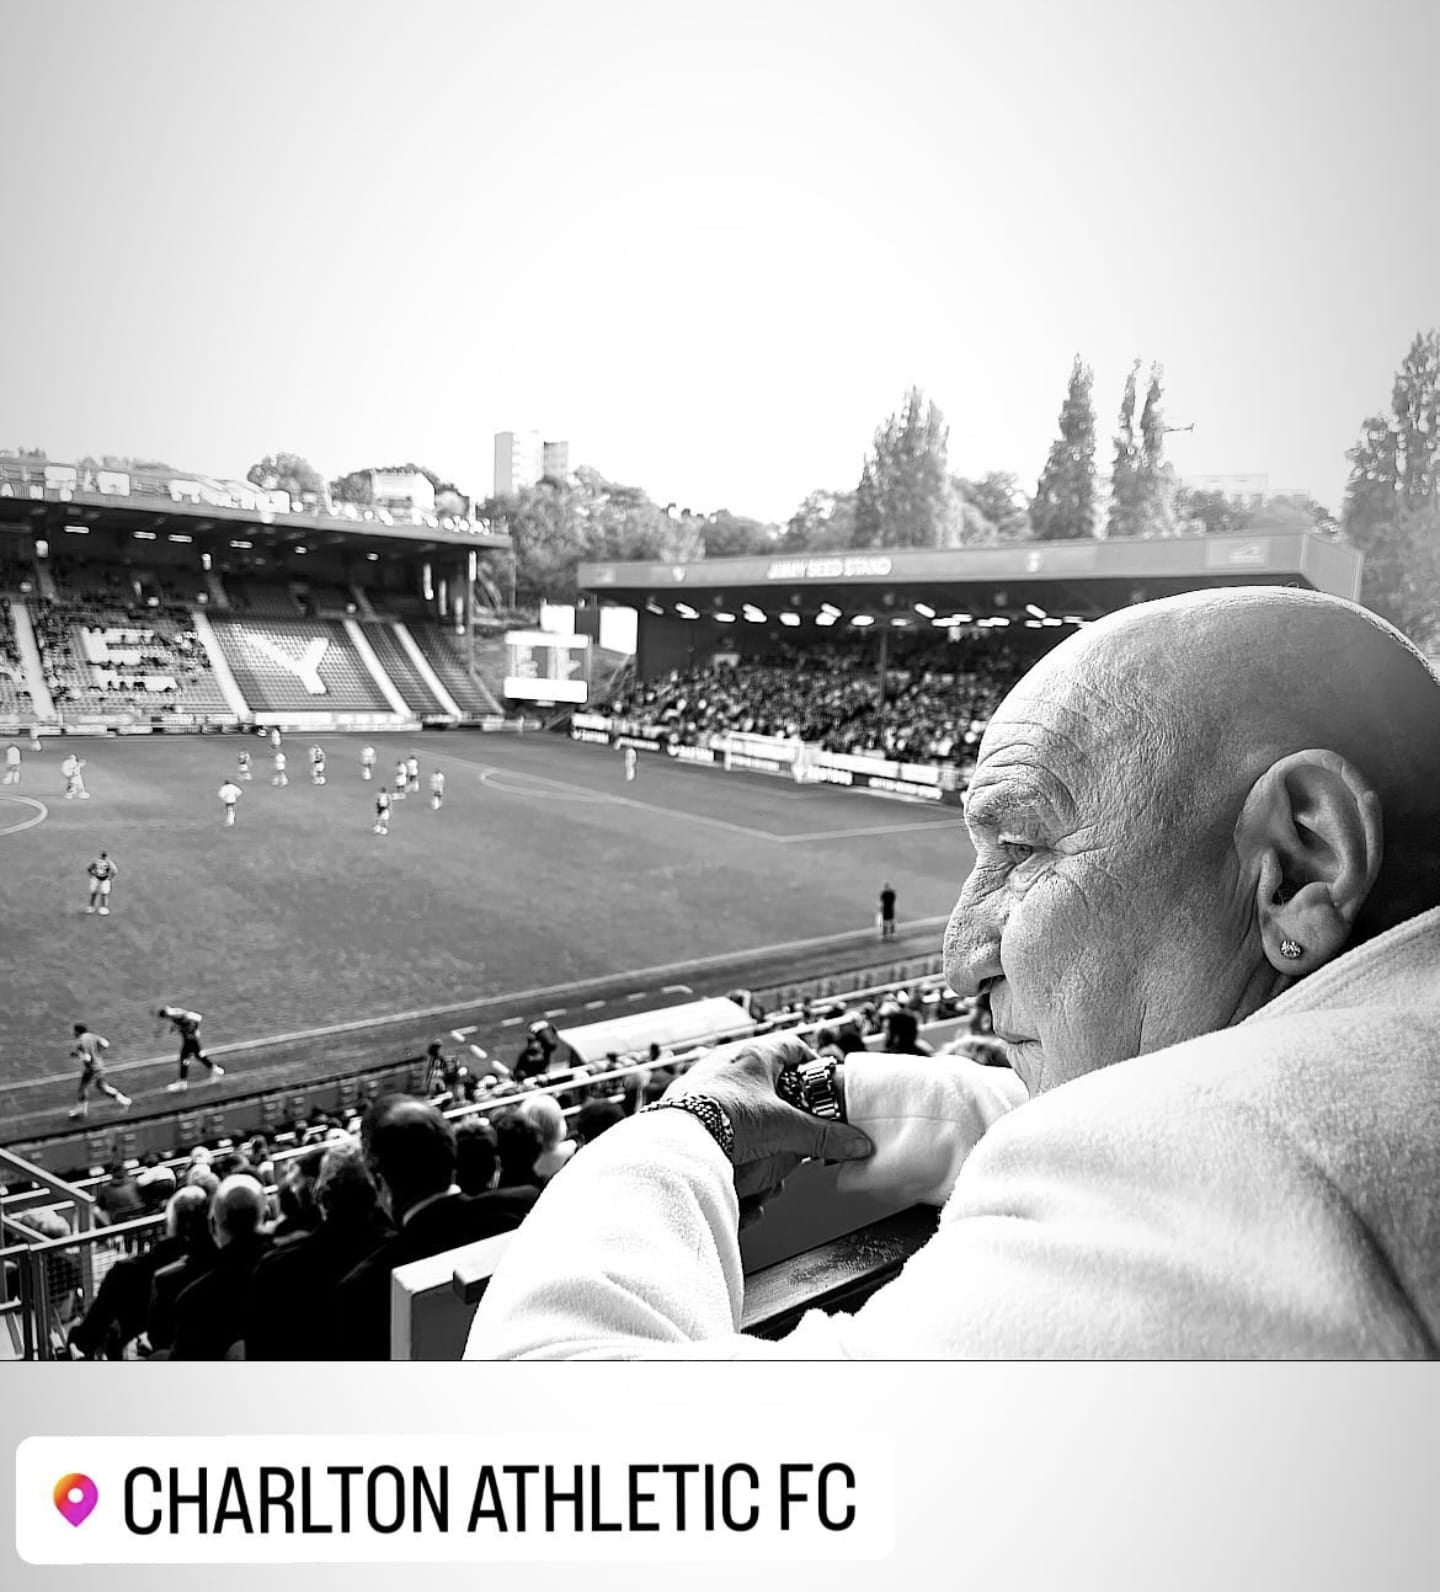 He saw his beloved Charlton FC win on the Saturday before his death